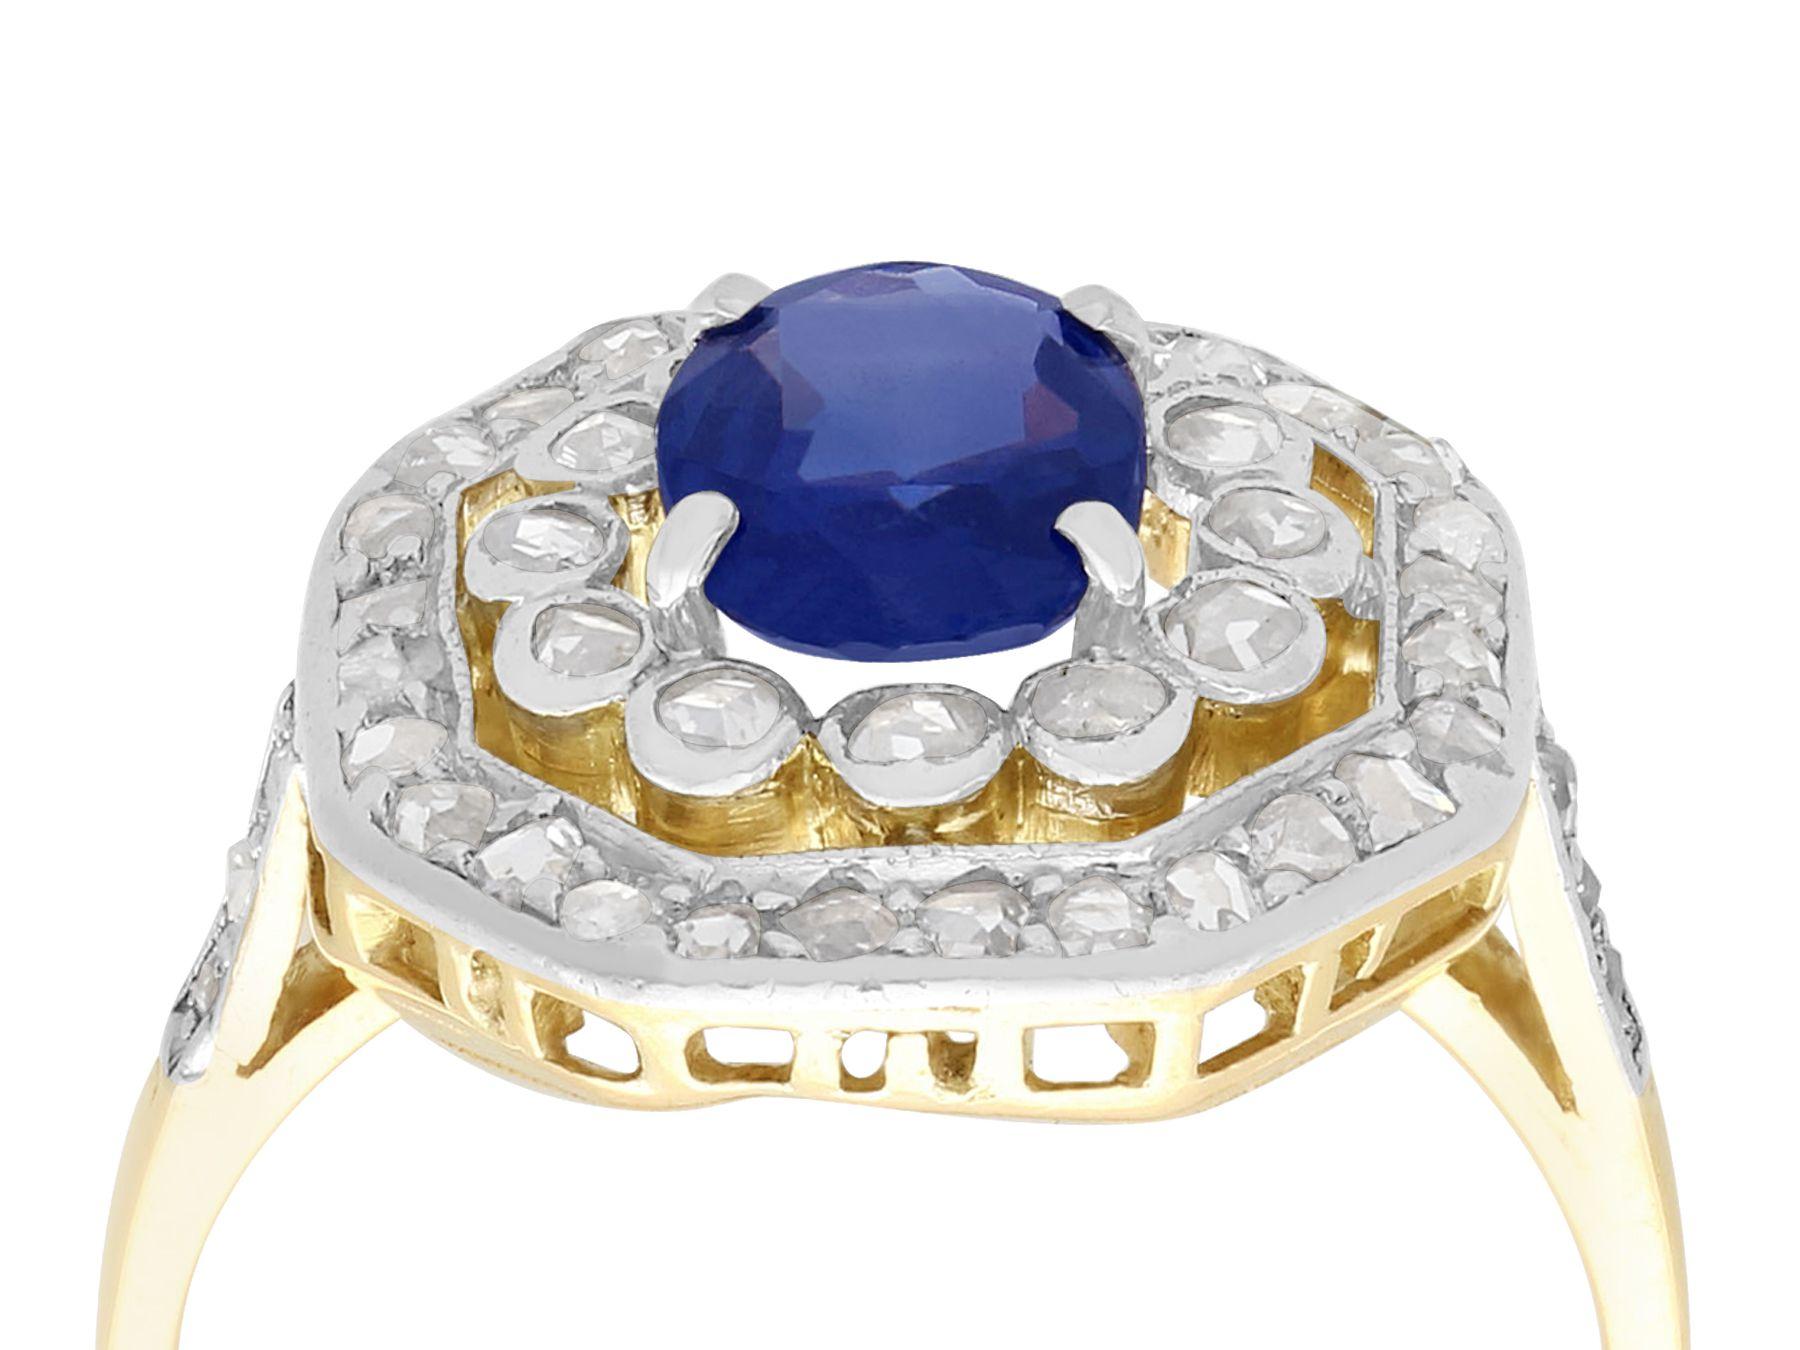 A fine and impressive antique 1.02 carat blue sapphire and 0.62 carat diamond, 10 karat yellow gold and platinum set cluster ring; part of our diverse antique jewelry collections.

This fine and impressive antique Edwardian sapphire and diamond ring